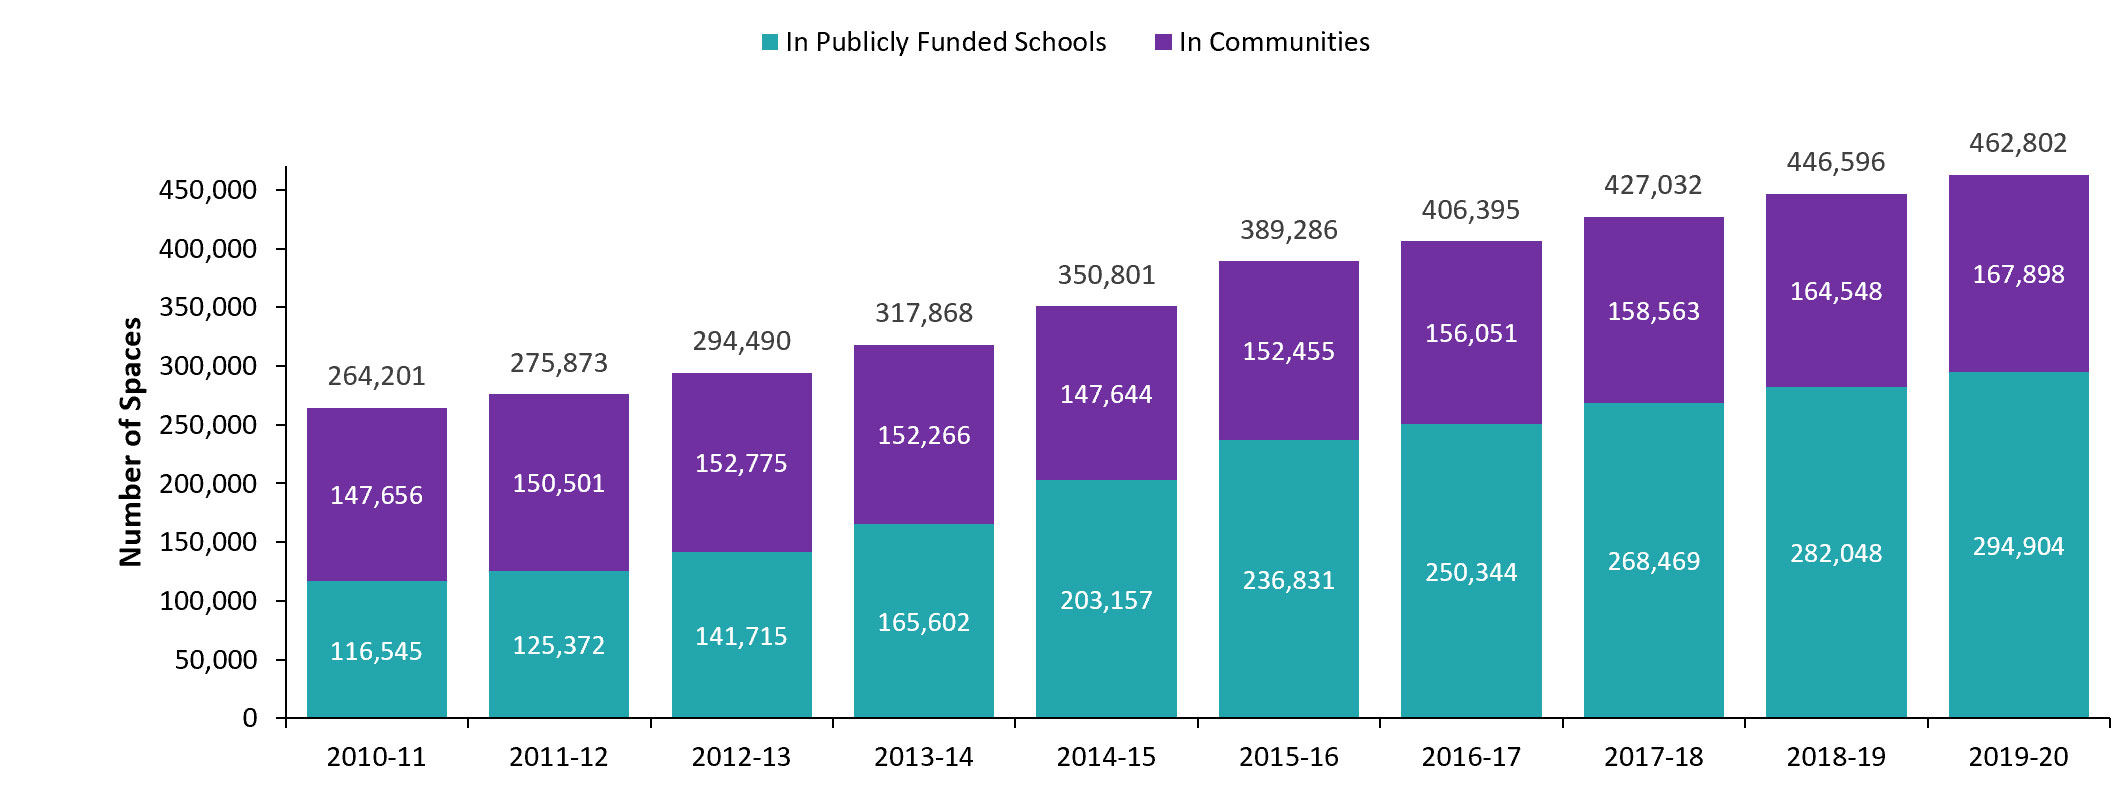 Licensed child care spaces in publicly funded schools and in communities, 2010‑11 to 2019‑20